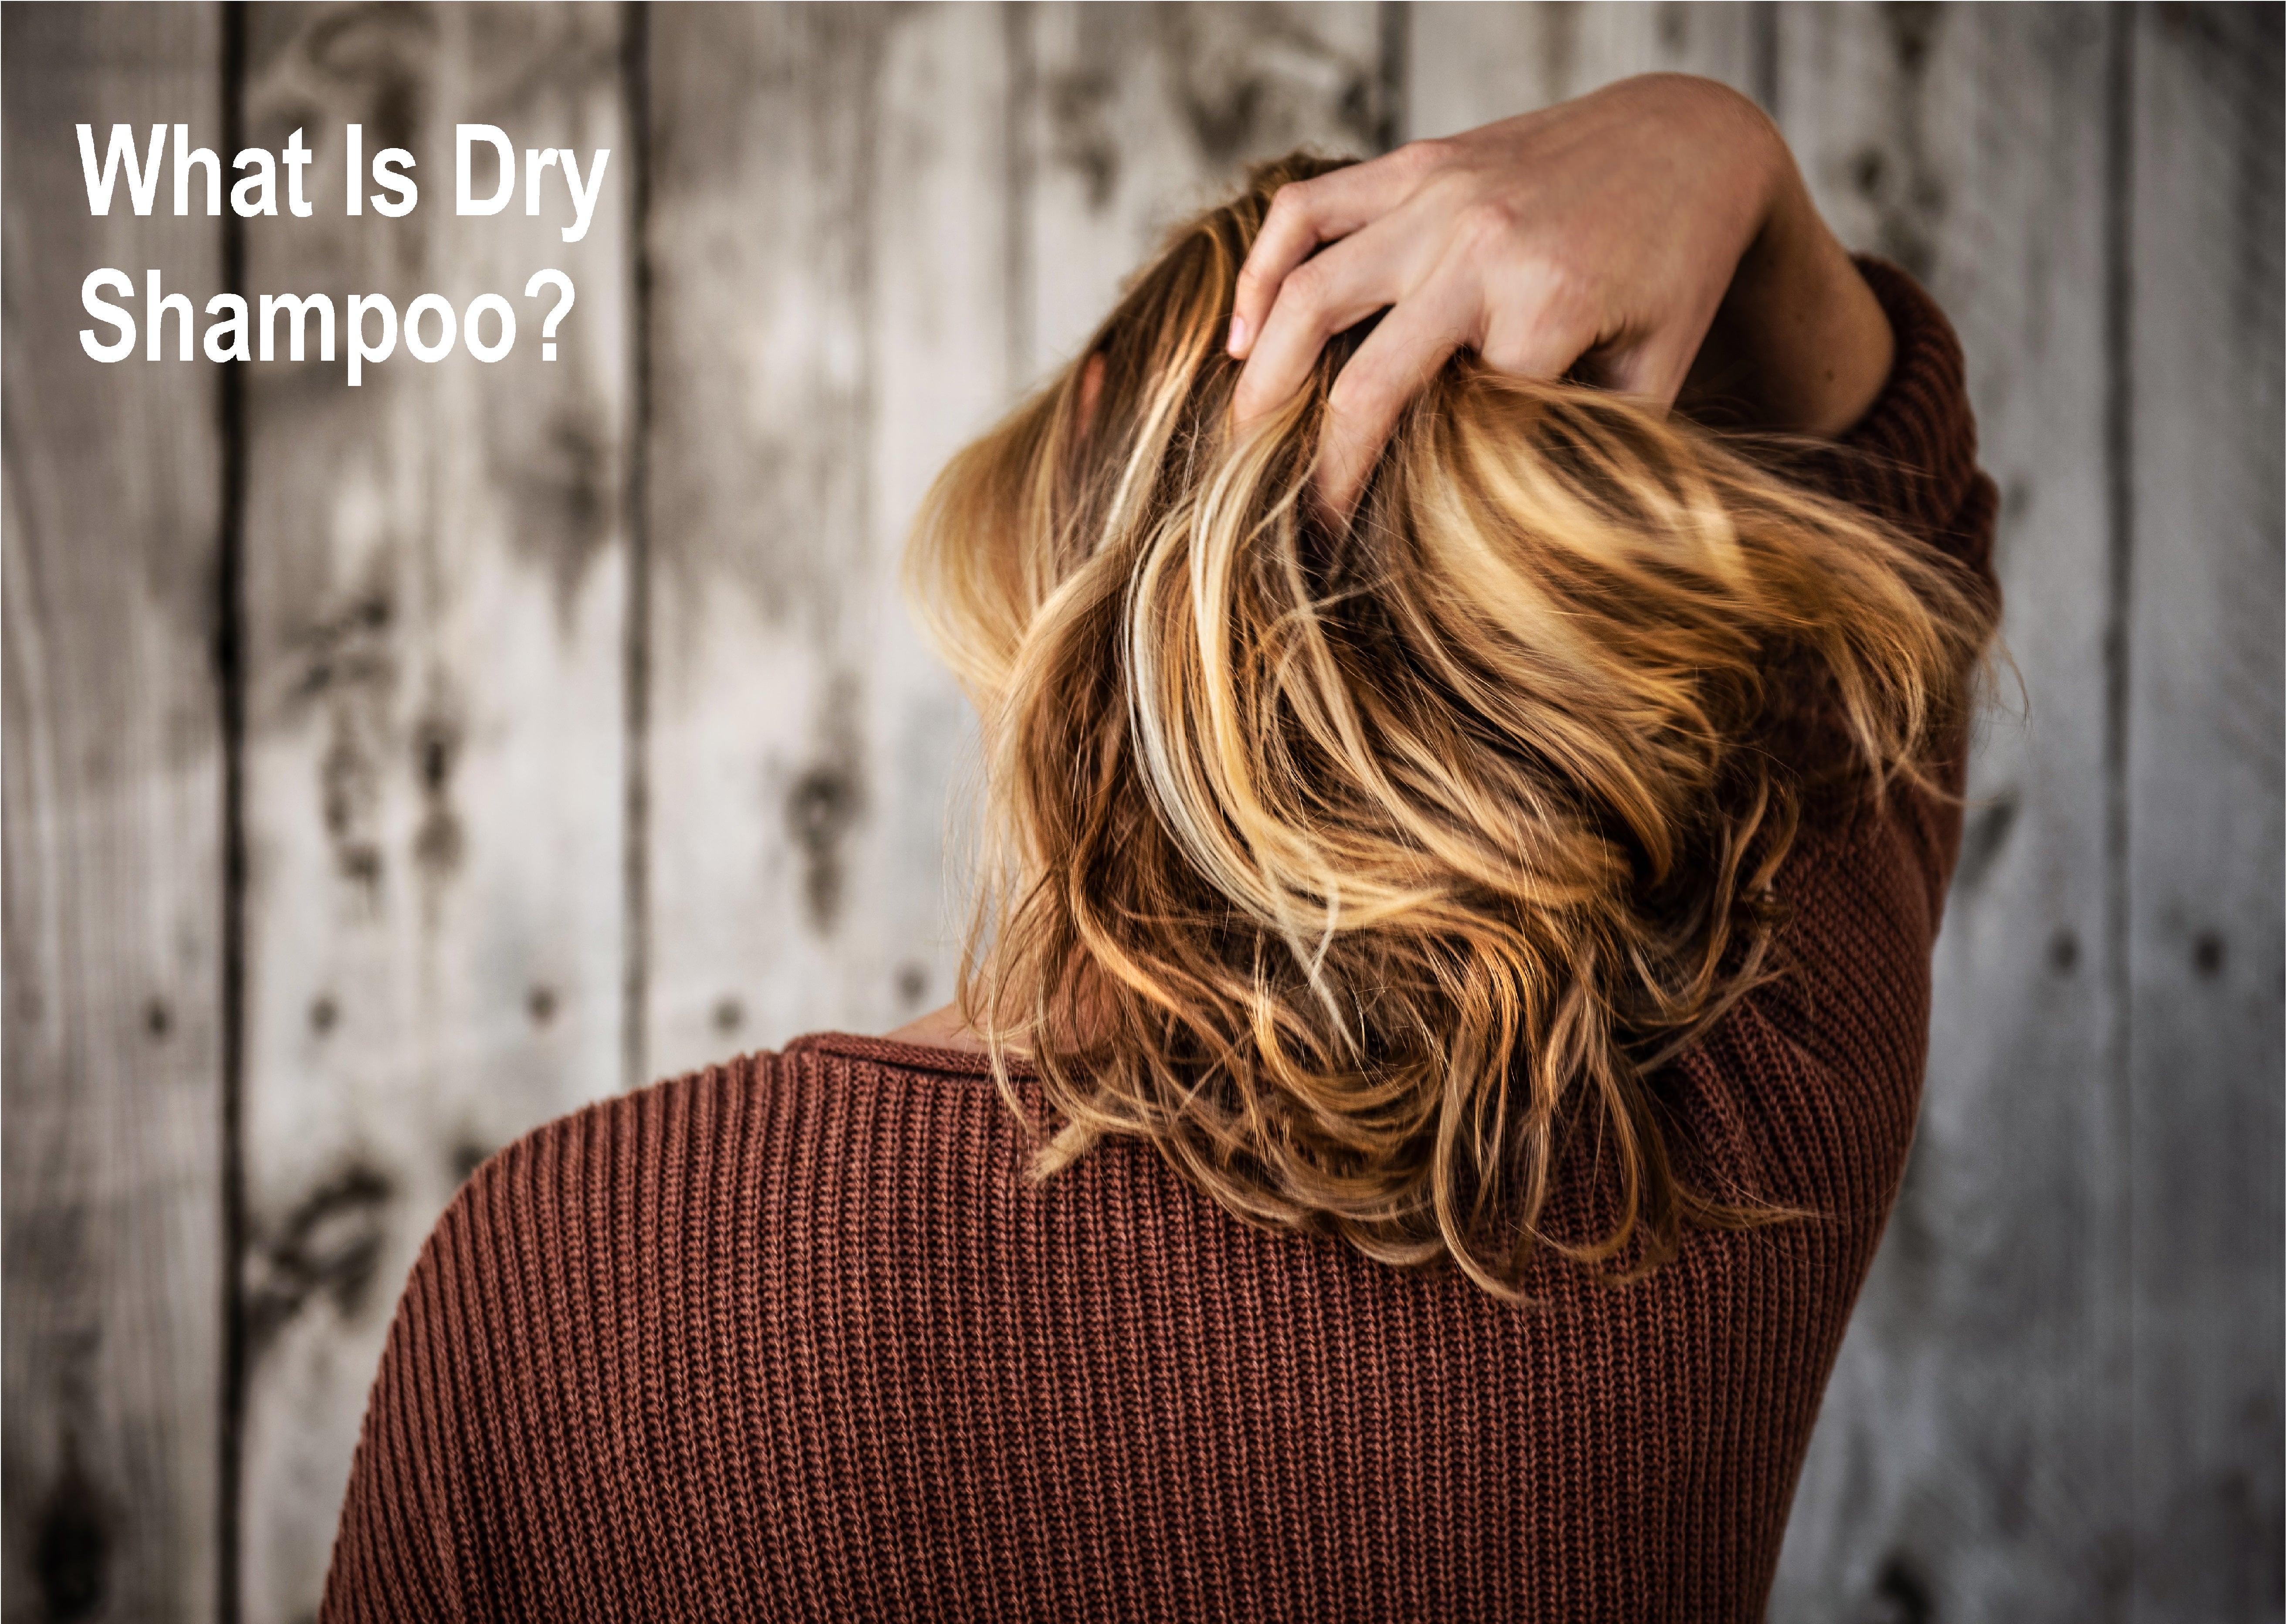 What is Dry shampoo?